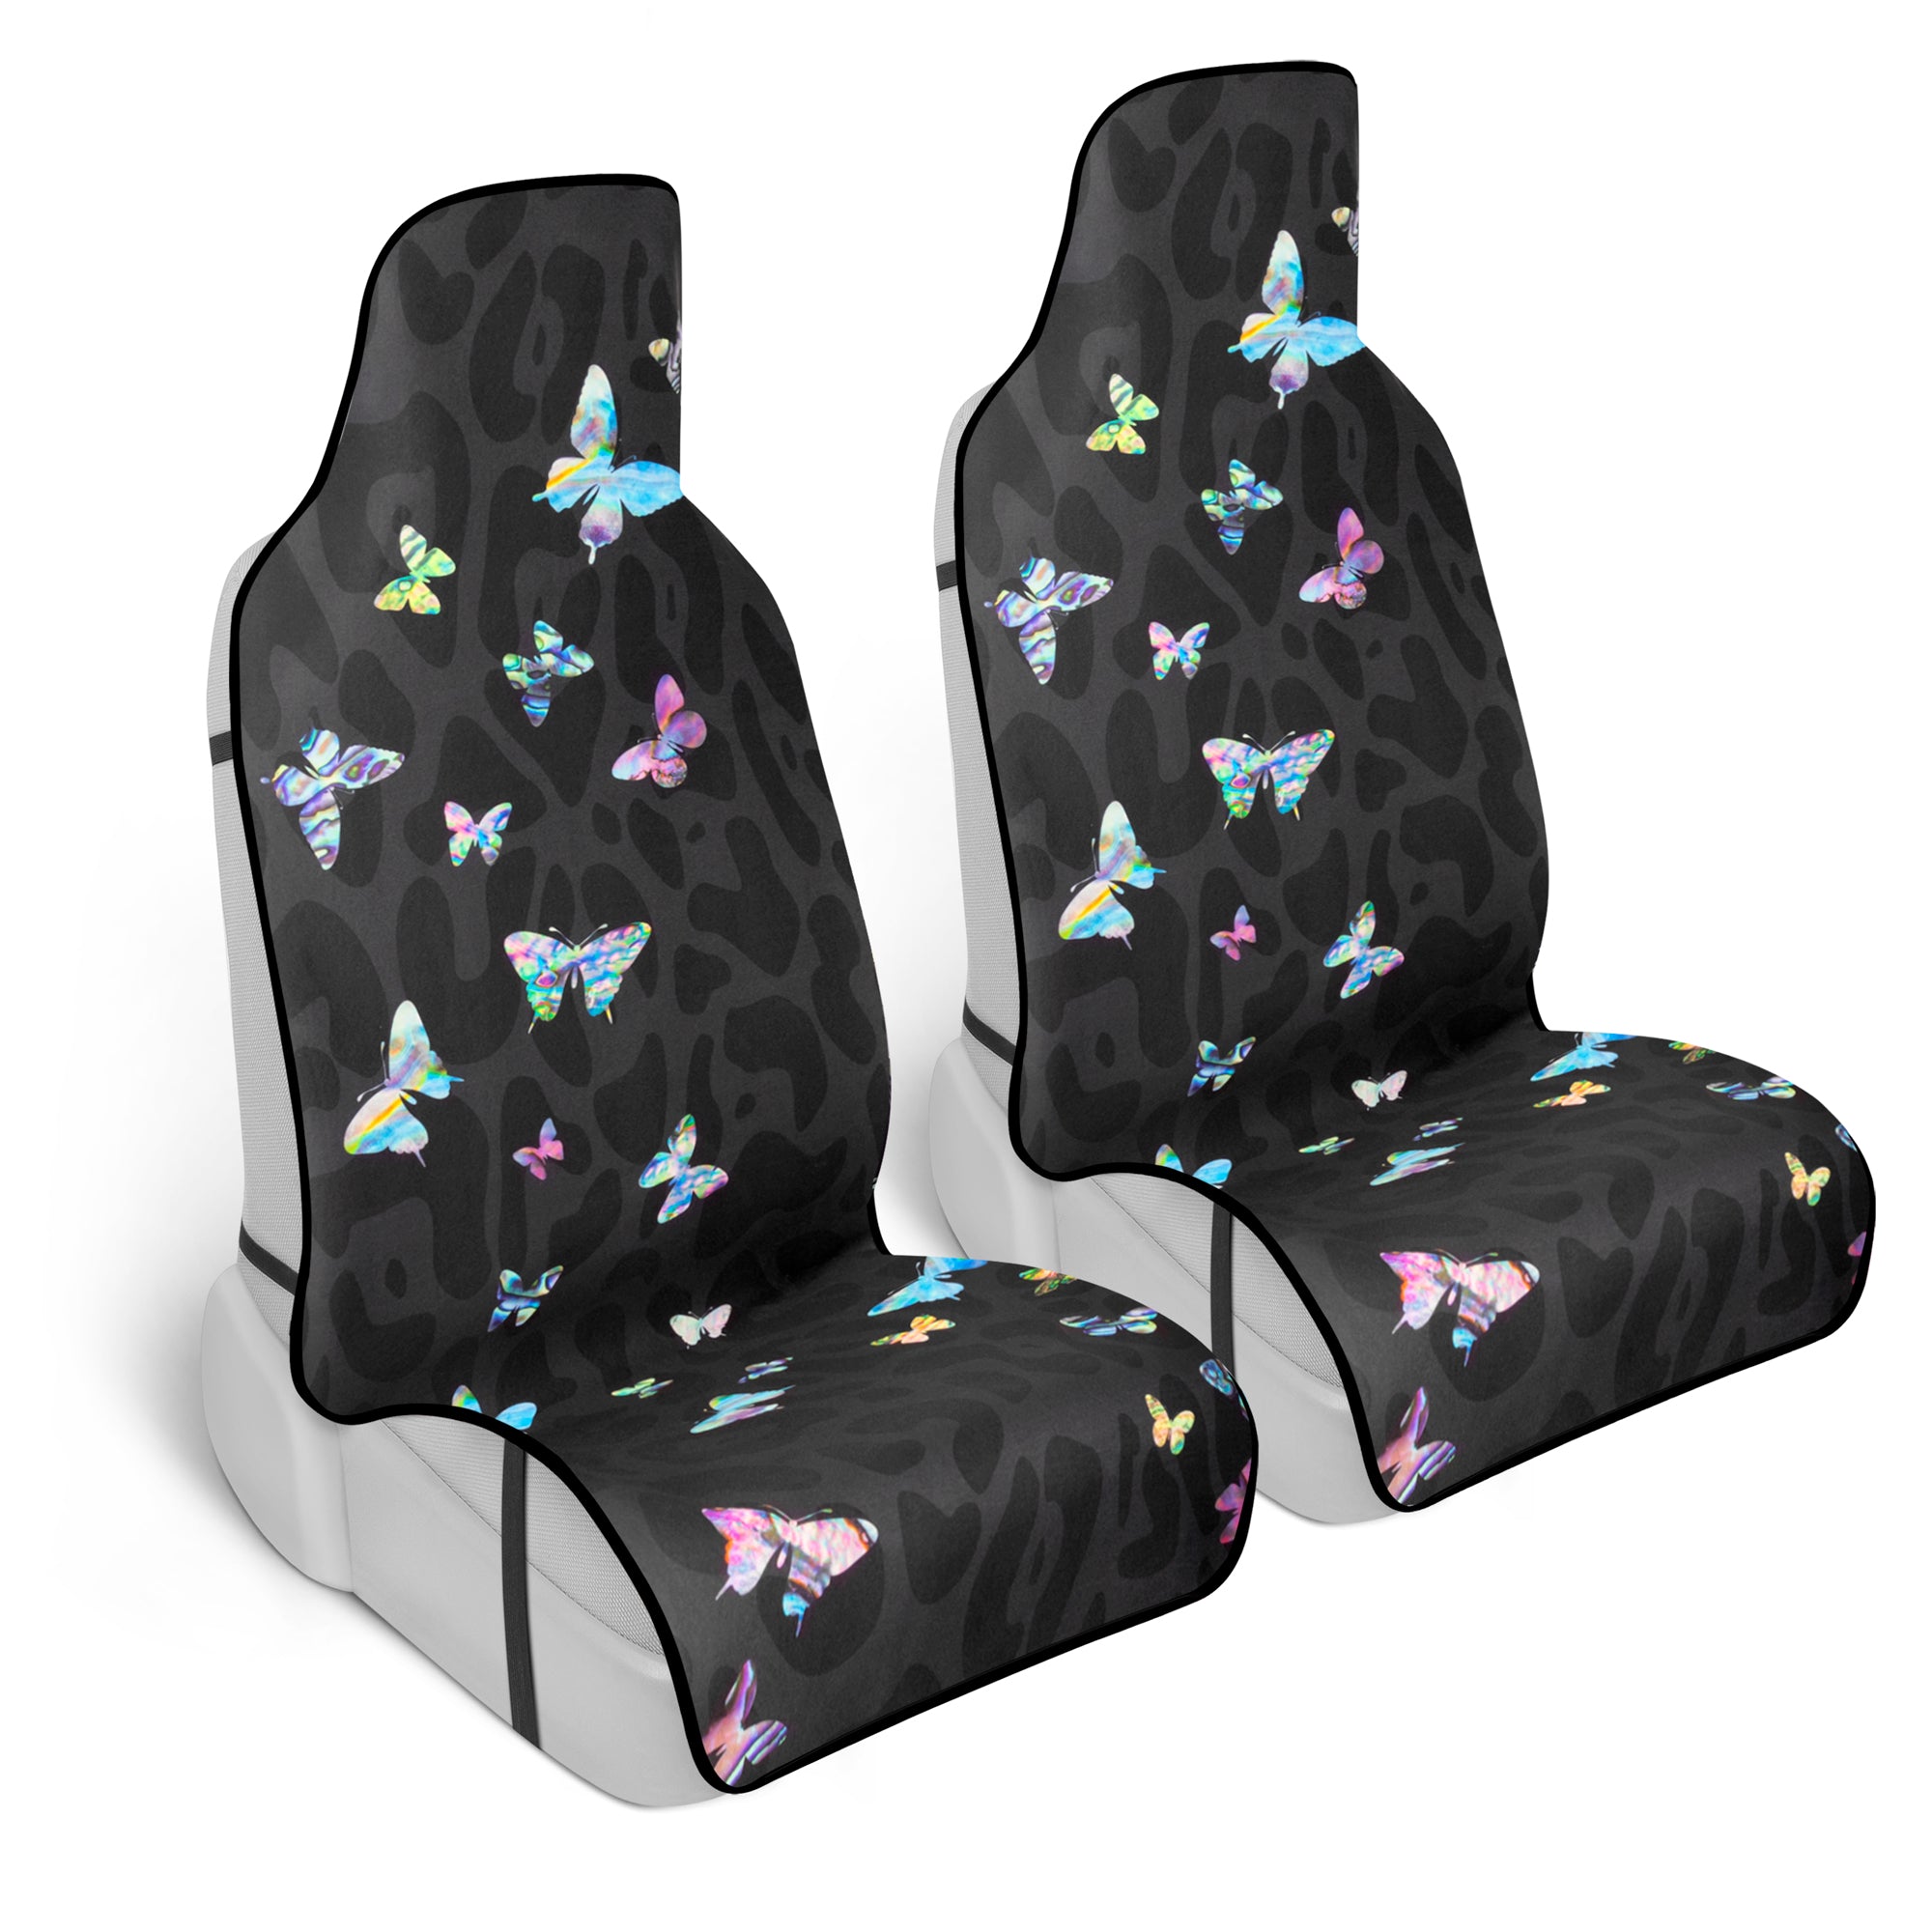 Carbella Black Leopard & Butterfly Car Seat Covers, 2 Pack Animal Print Front Seat Covers for Cars Trucks SUV, Car Accessories for Women